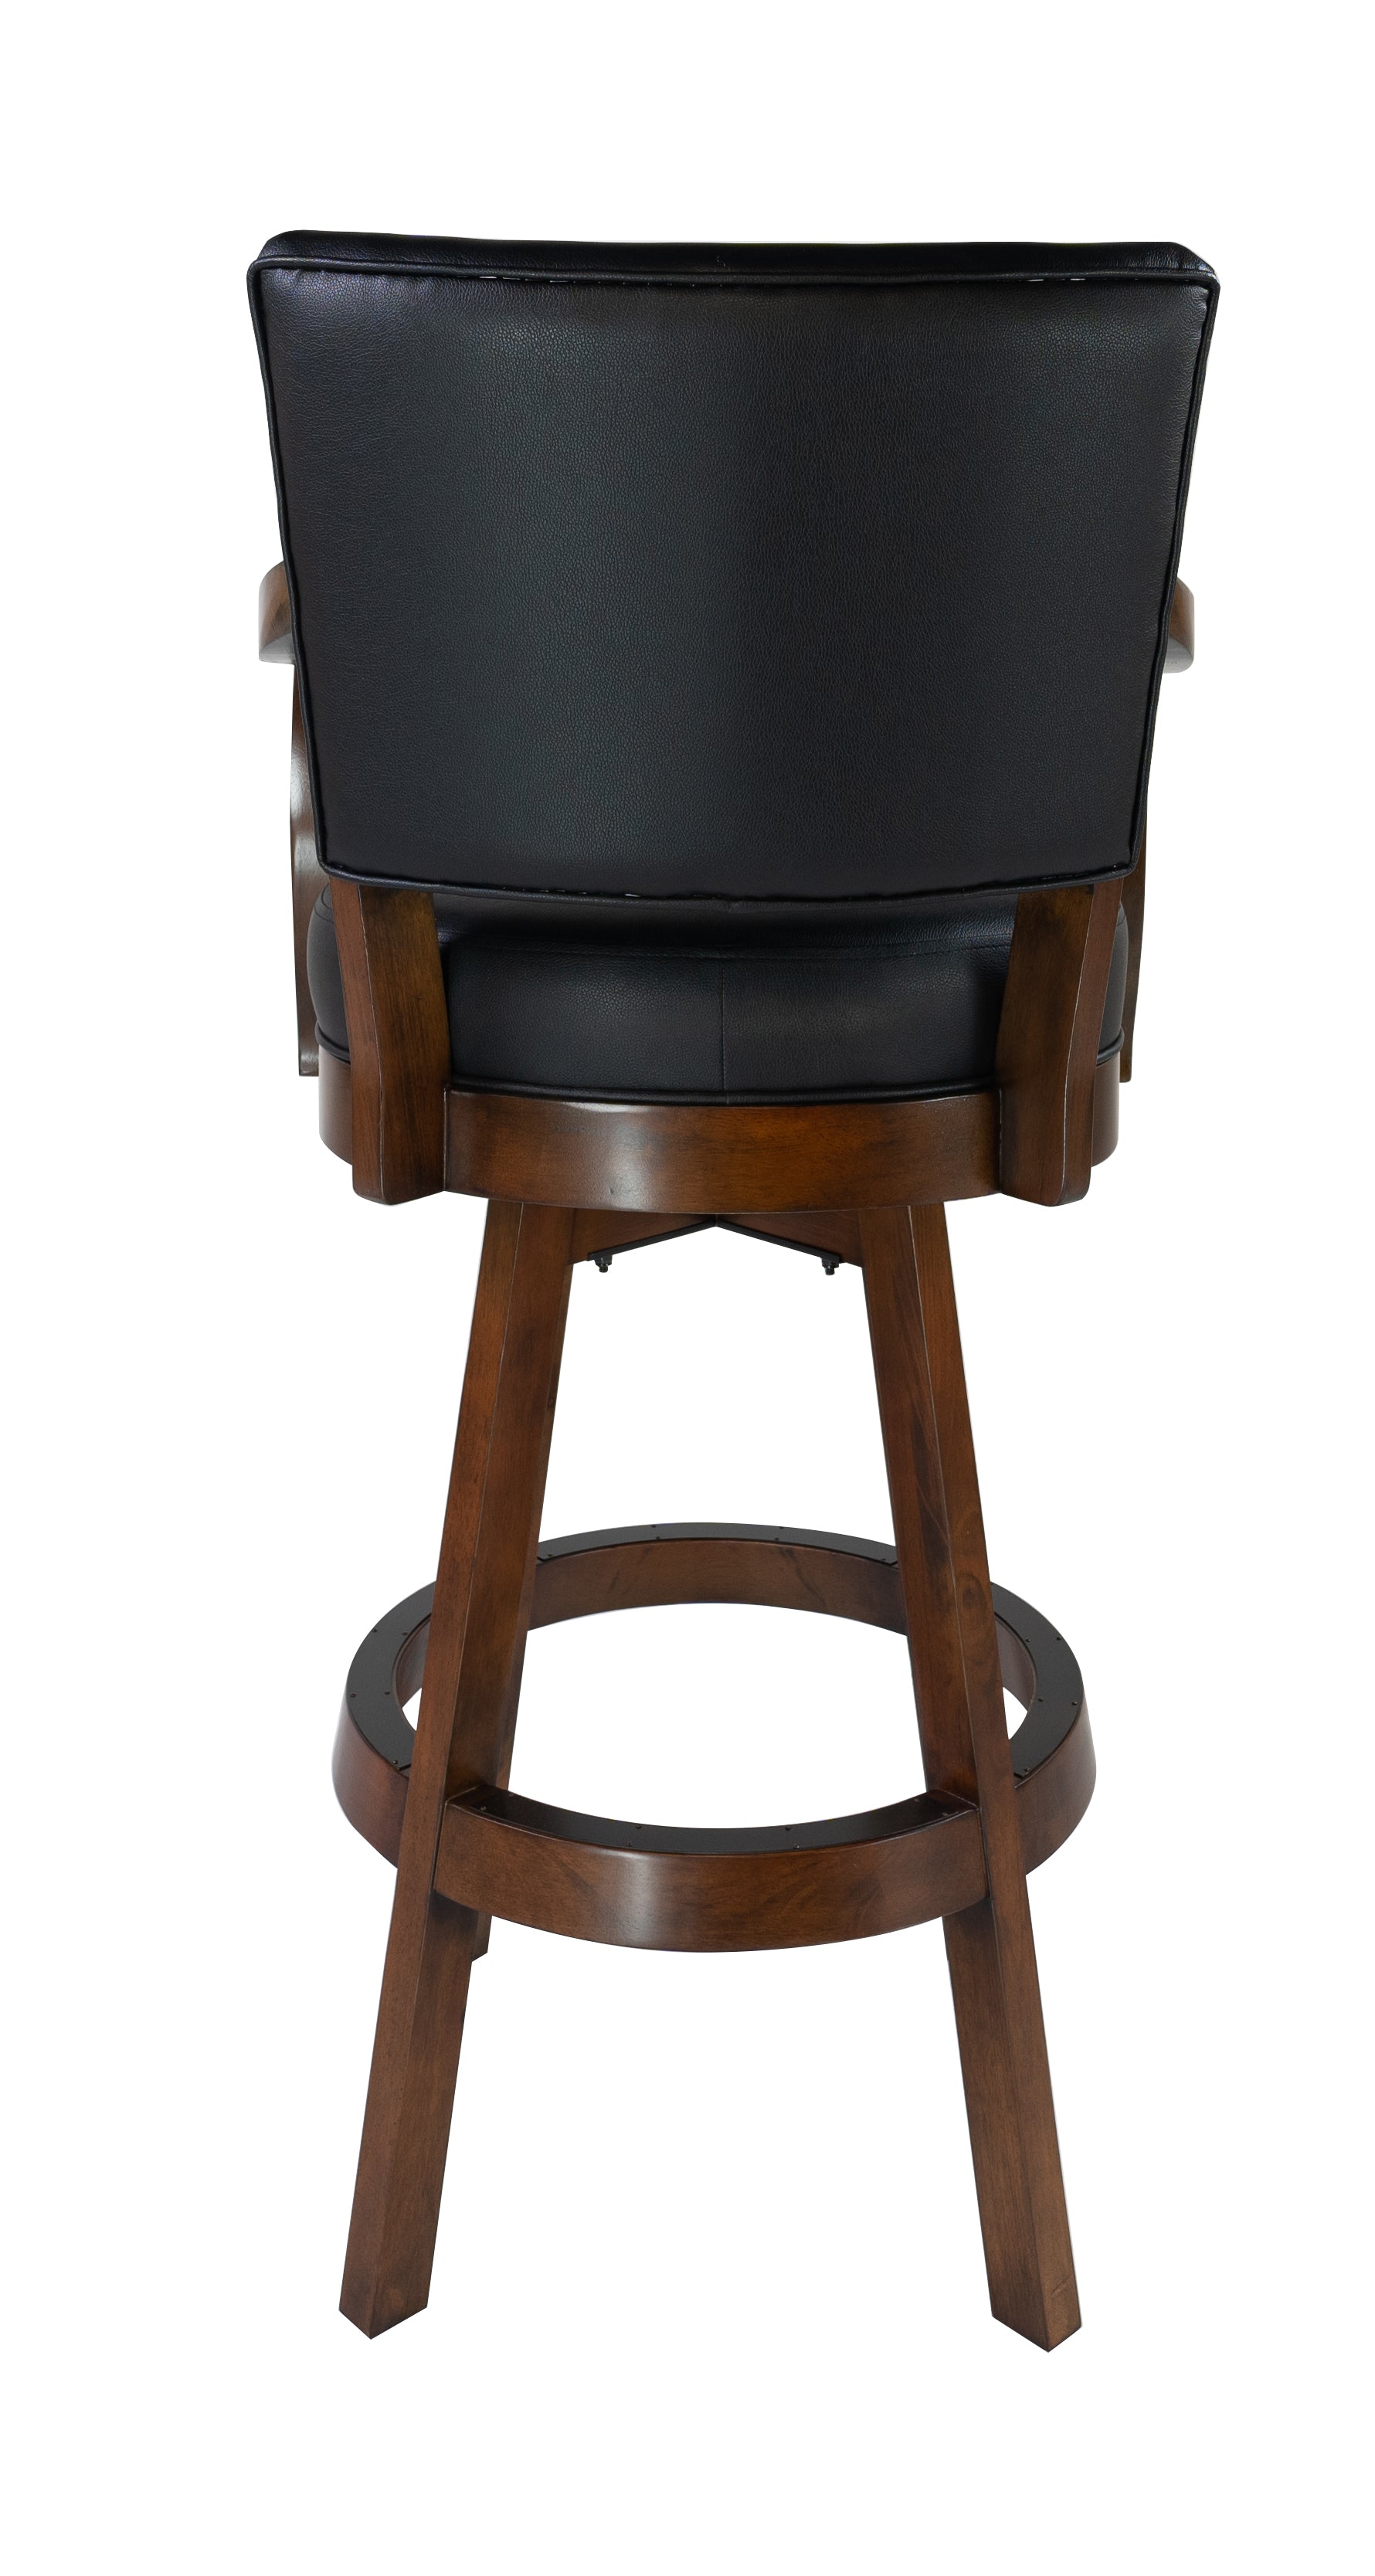 Legacy Billiards Classic Backed Barstool with Arms in Gunshot Finish Rear View